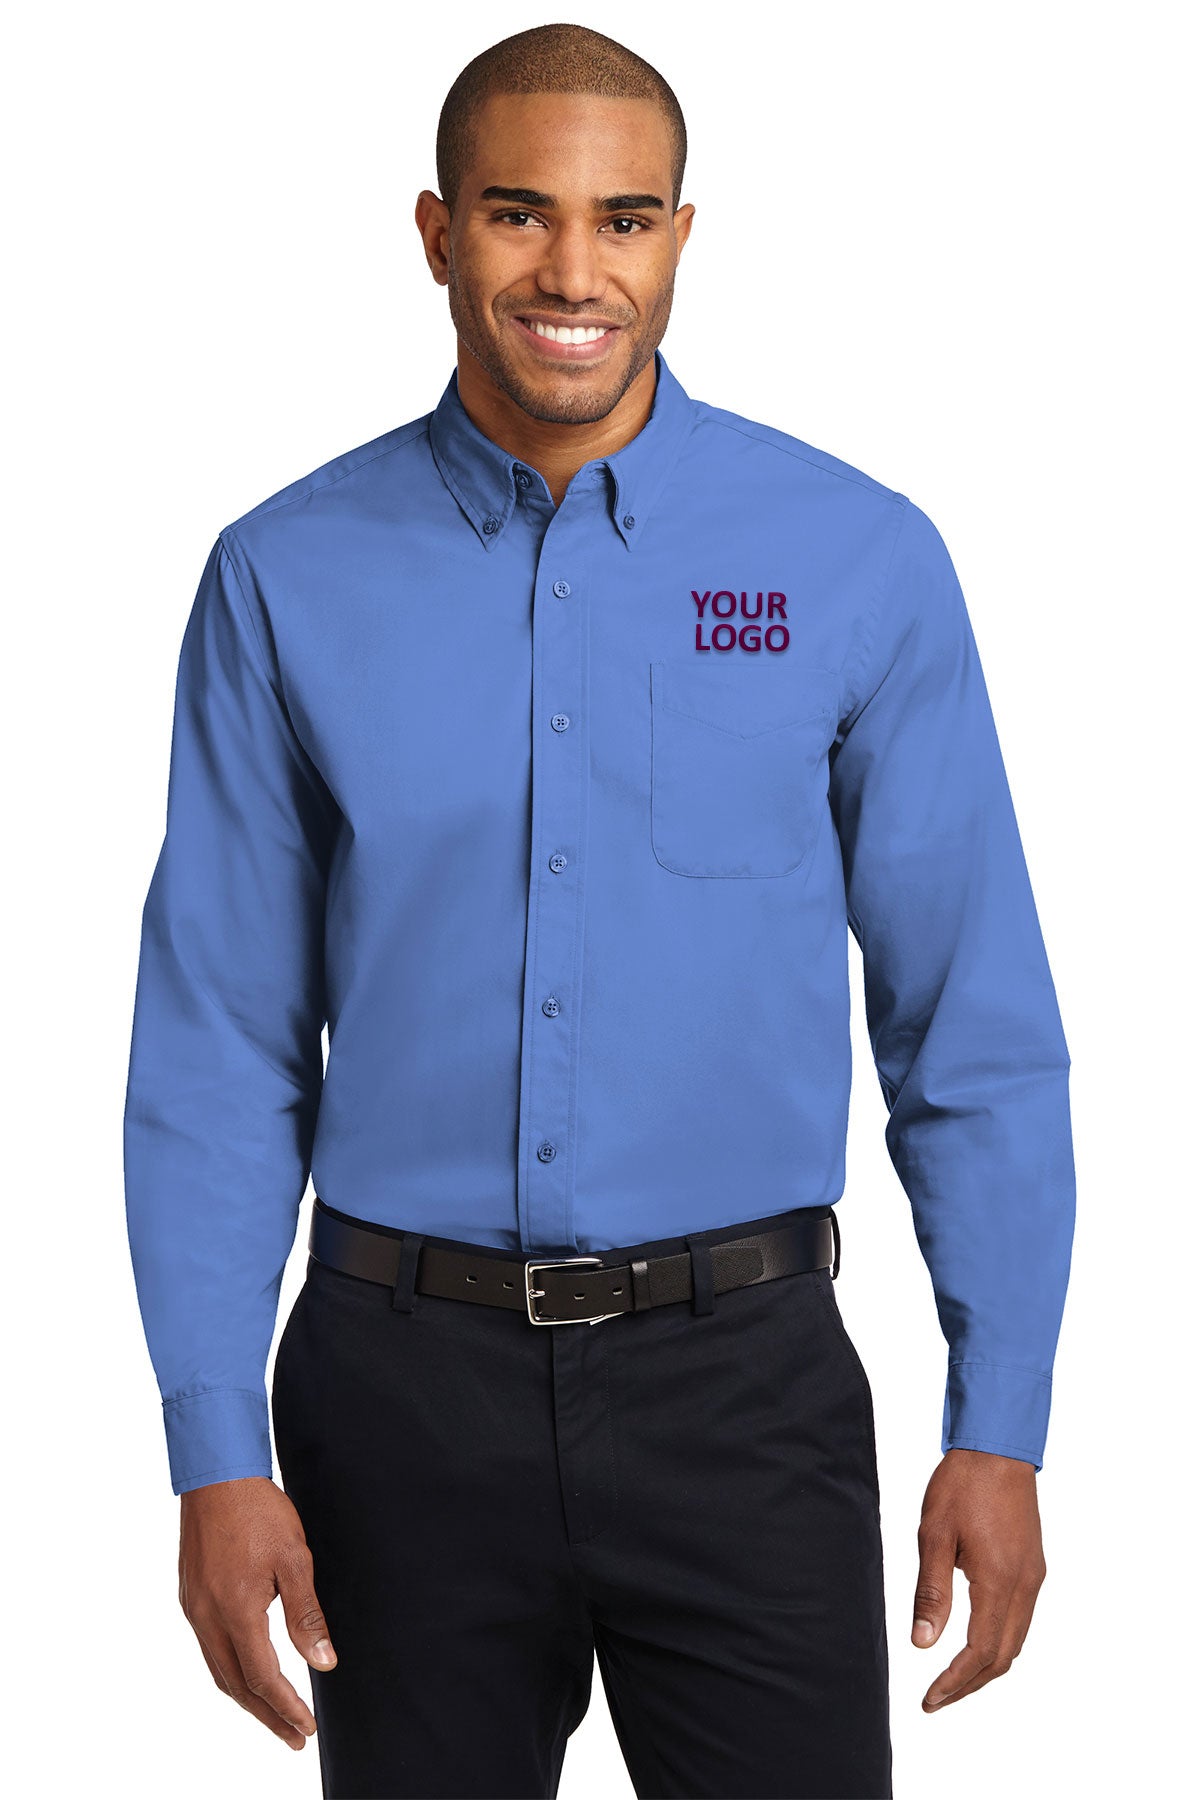 Port Authority Ultramarine Blue S608 business shirts with company logo